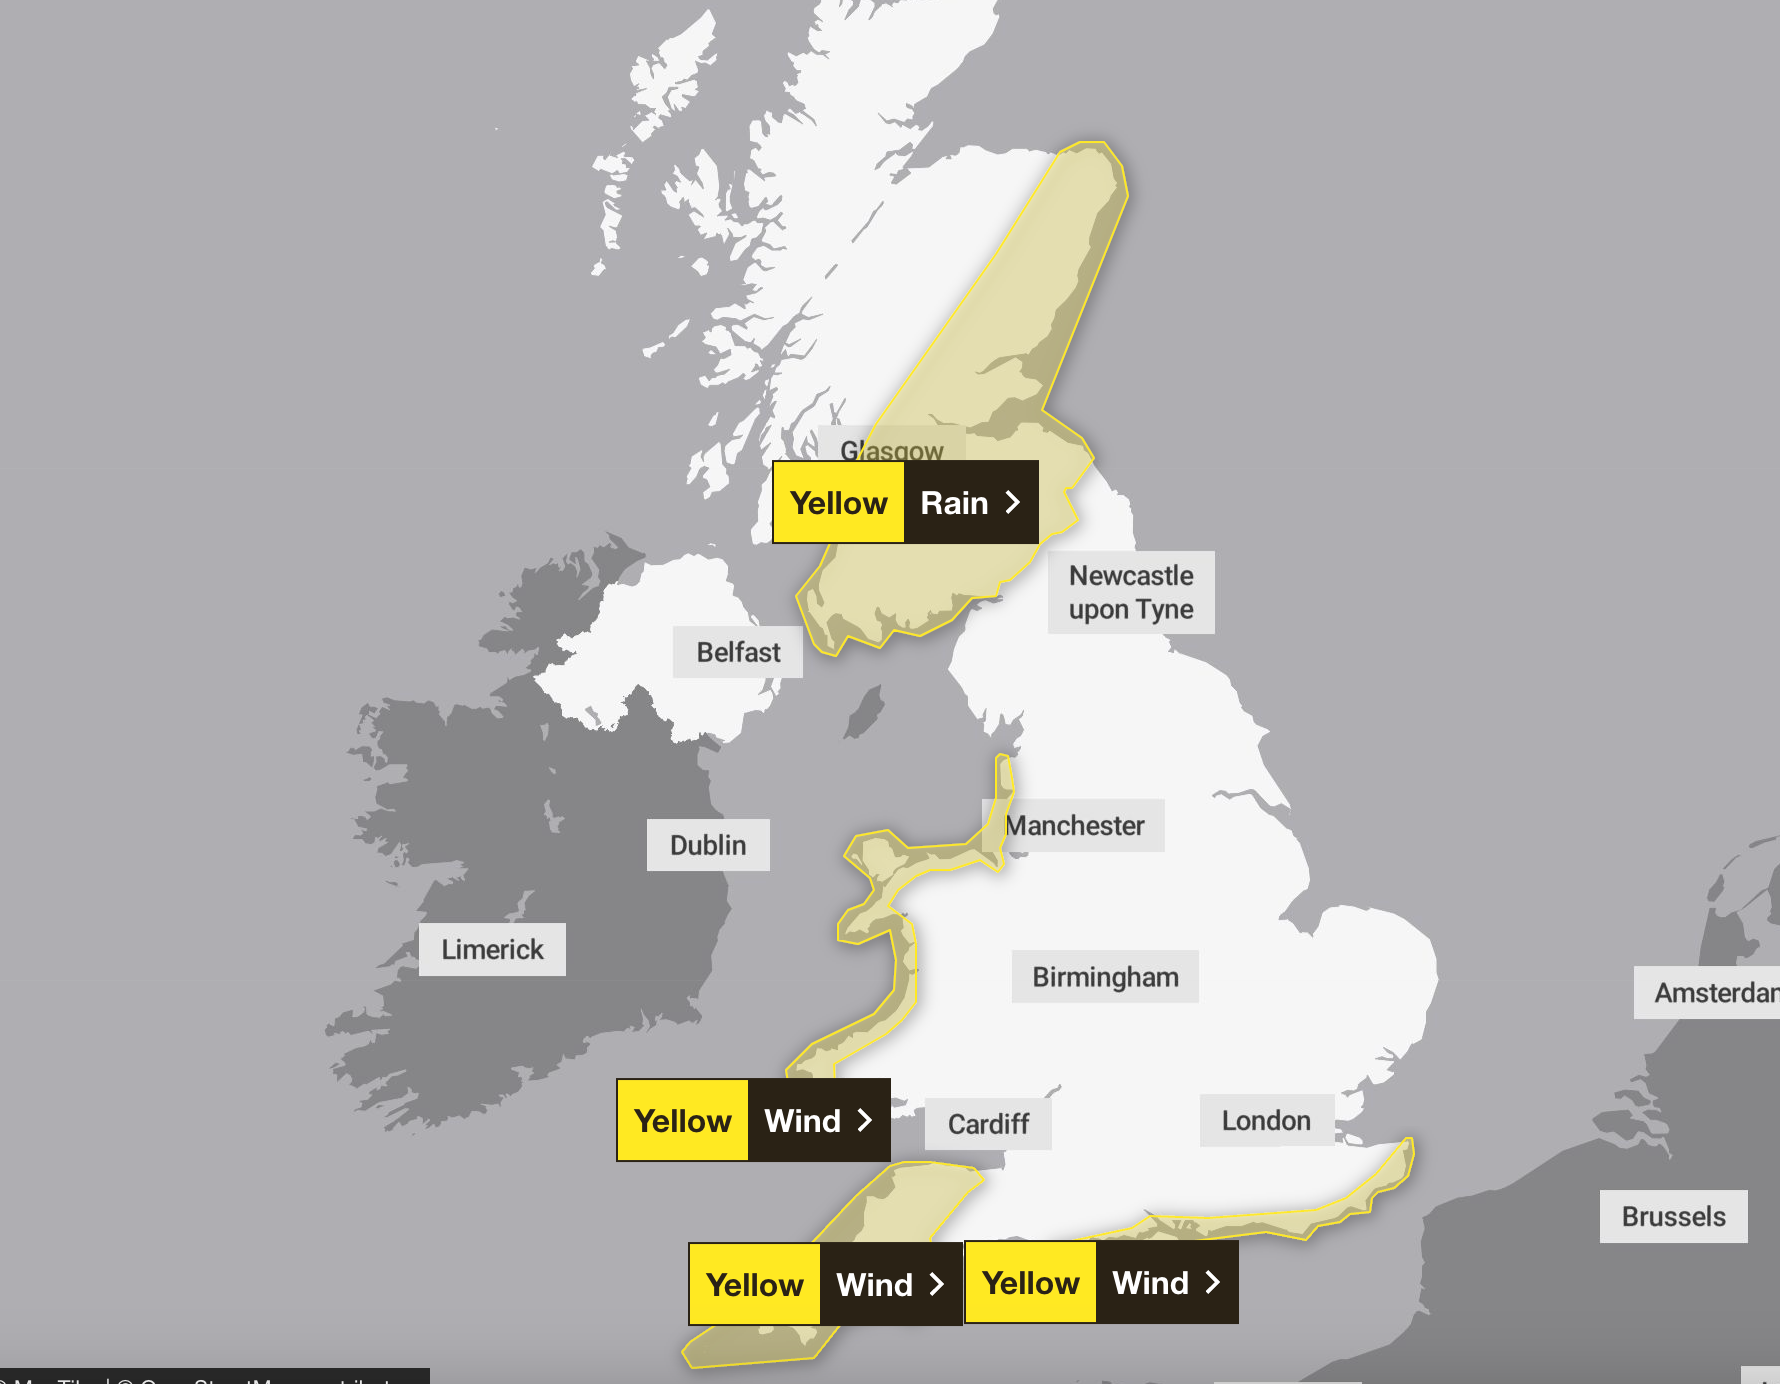 Three yellow wind warnings and a rain warning were also put in place across much of Scotland, the west coast of Wales and the south-east coast of England on Tuesday